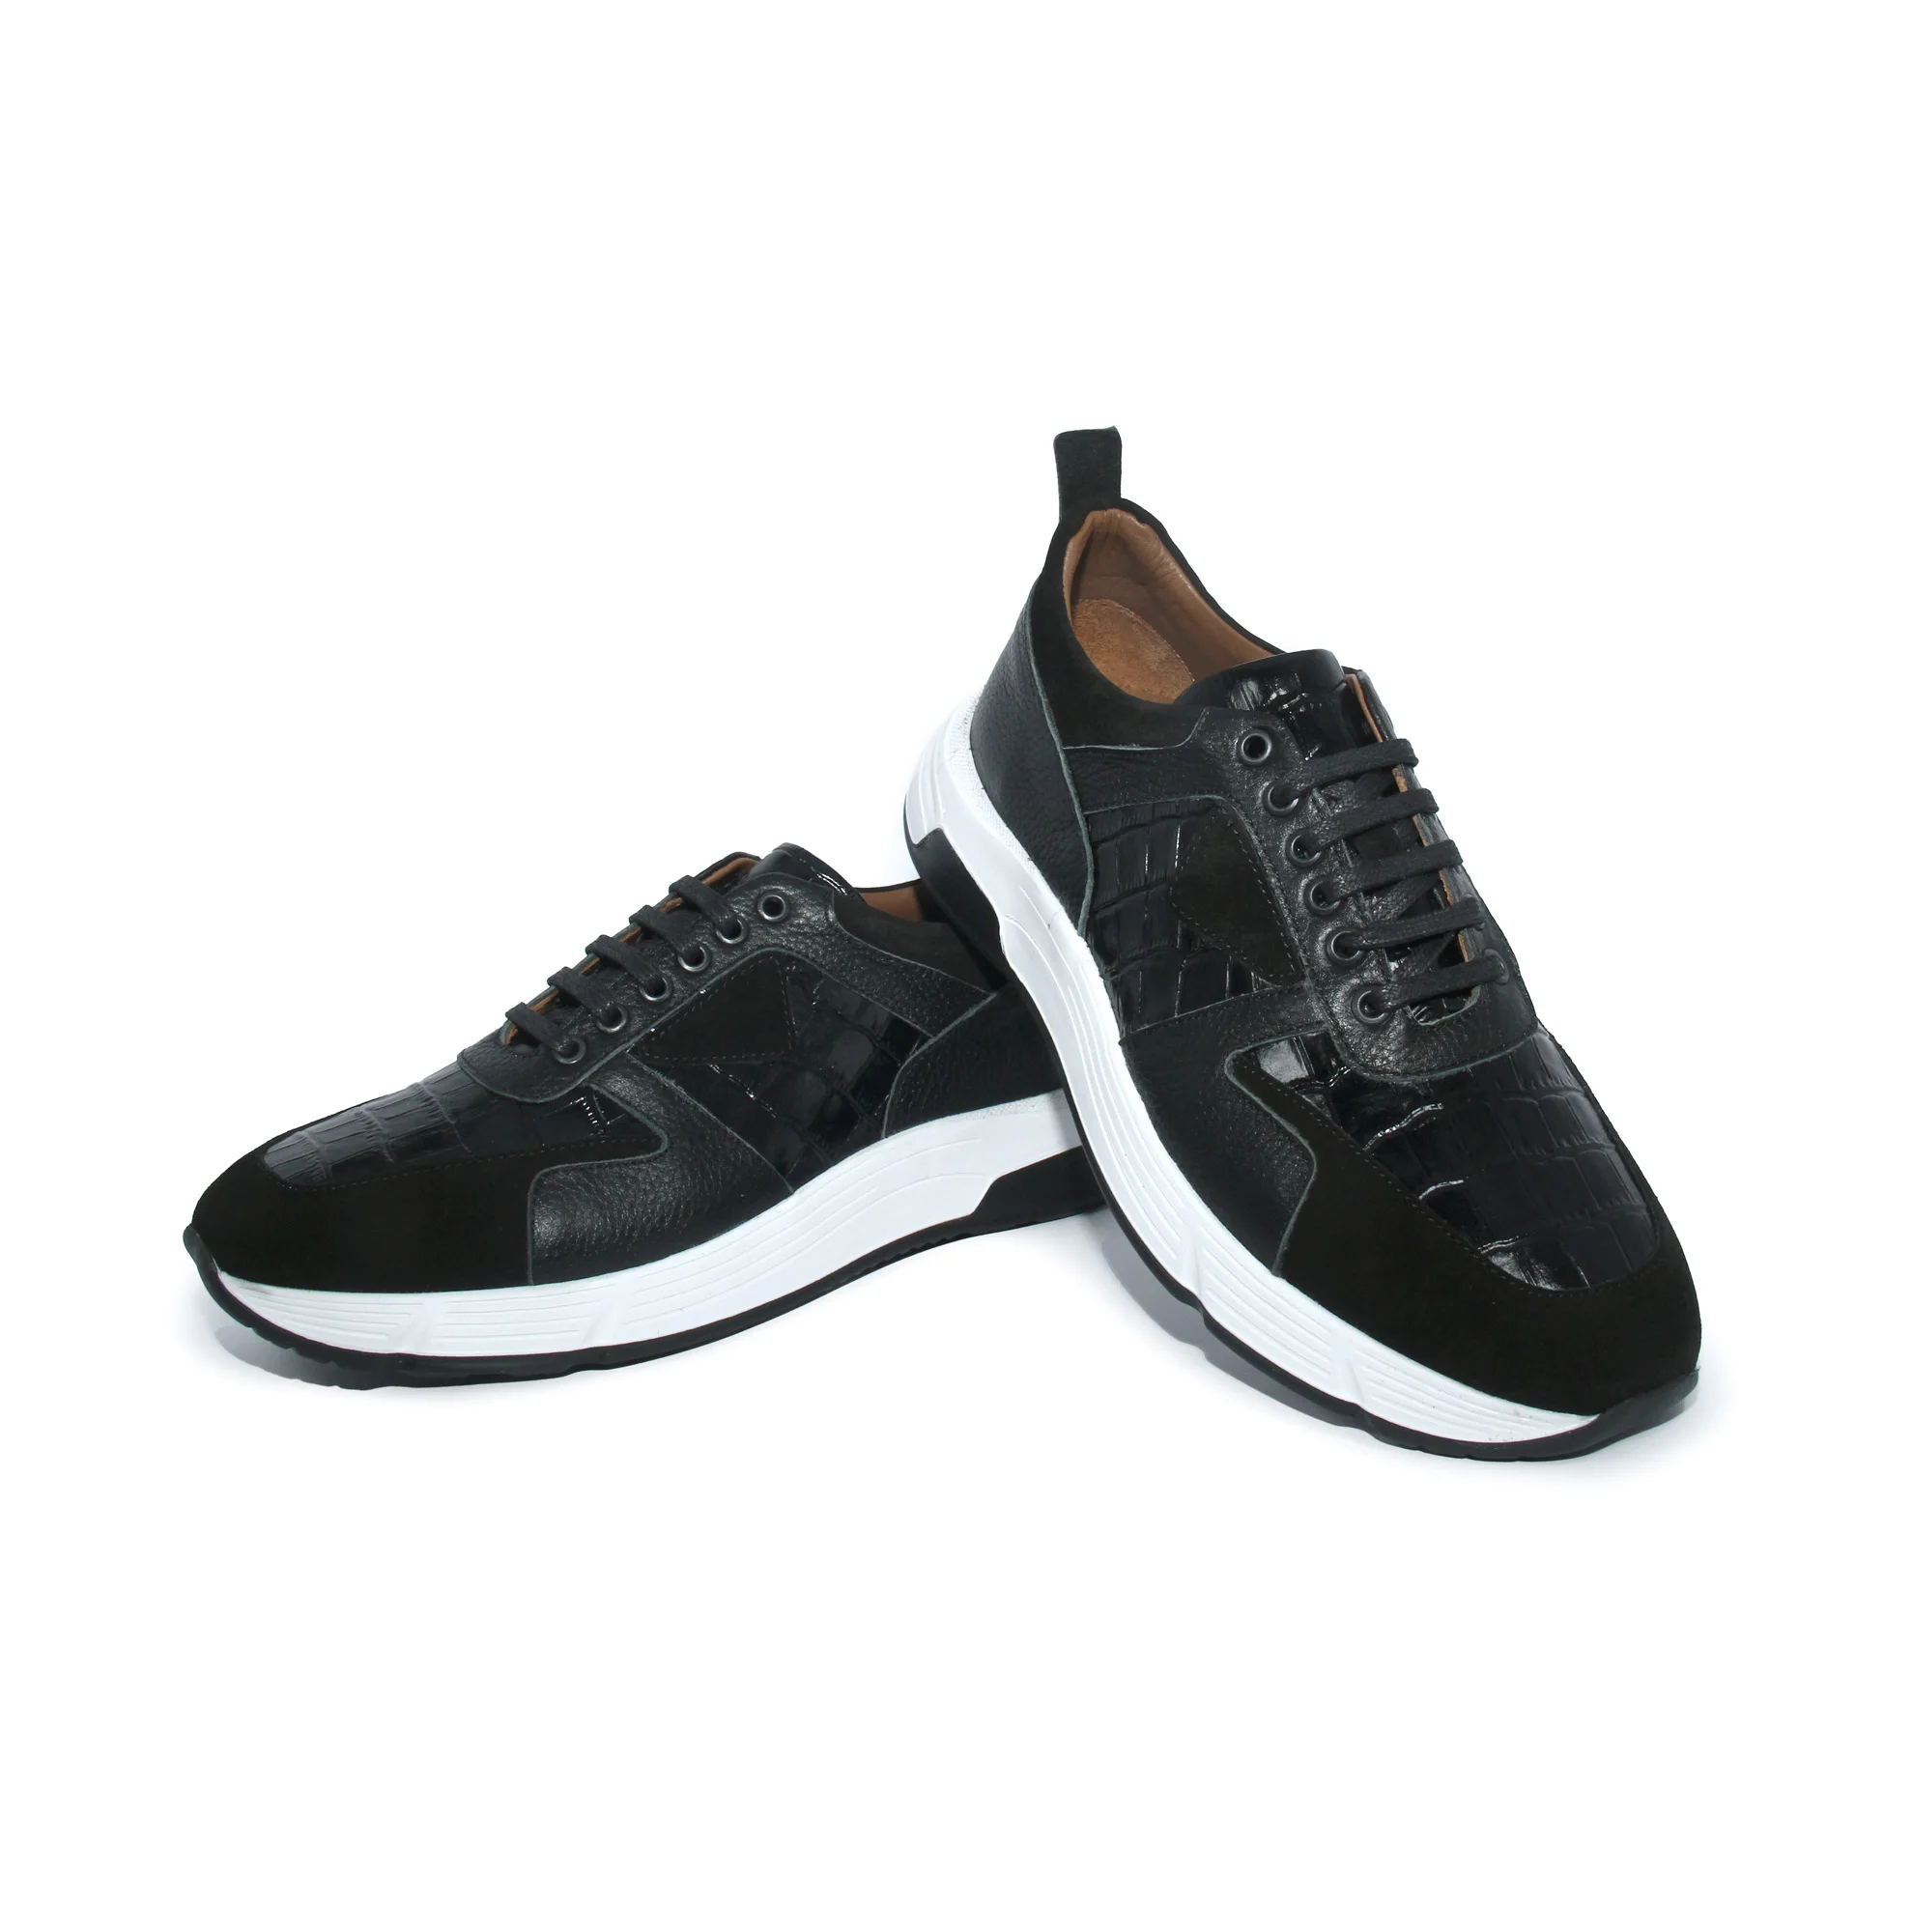 

Handmade Black Sport Sneakers Croco Alligator Patterned Calf Leather & Suede, Leather Insole, Men's Casual Running Shoes